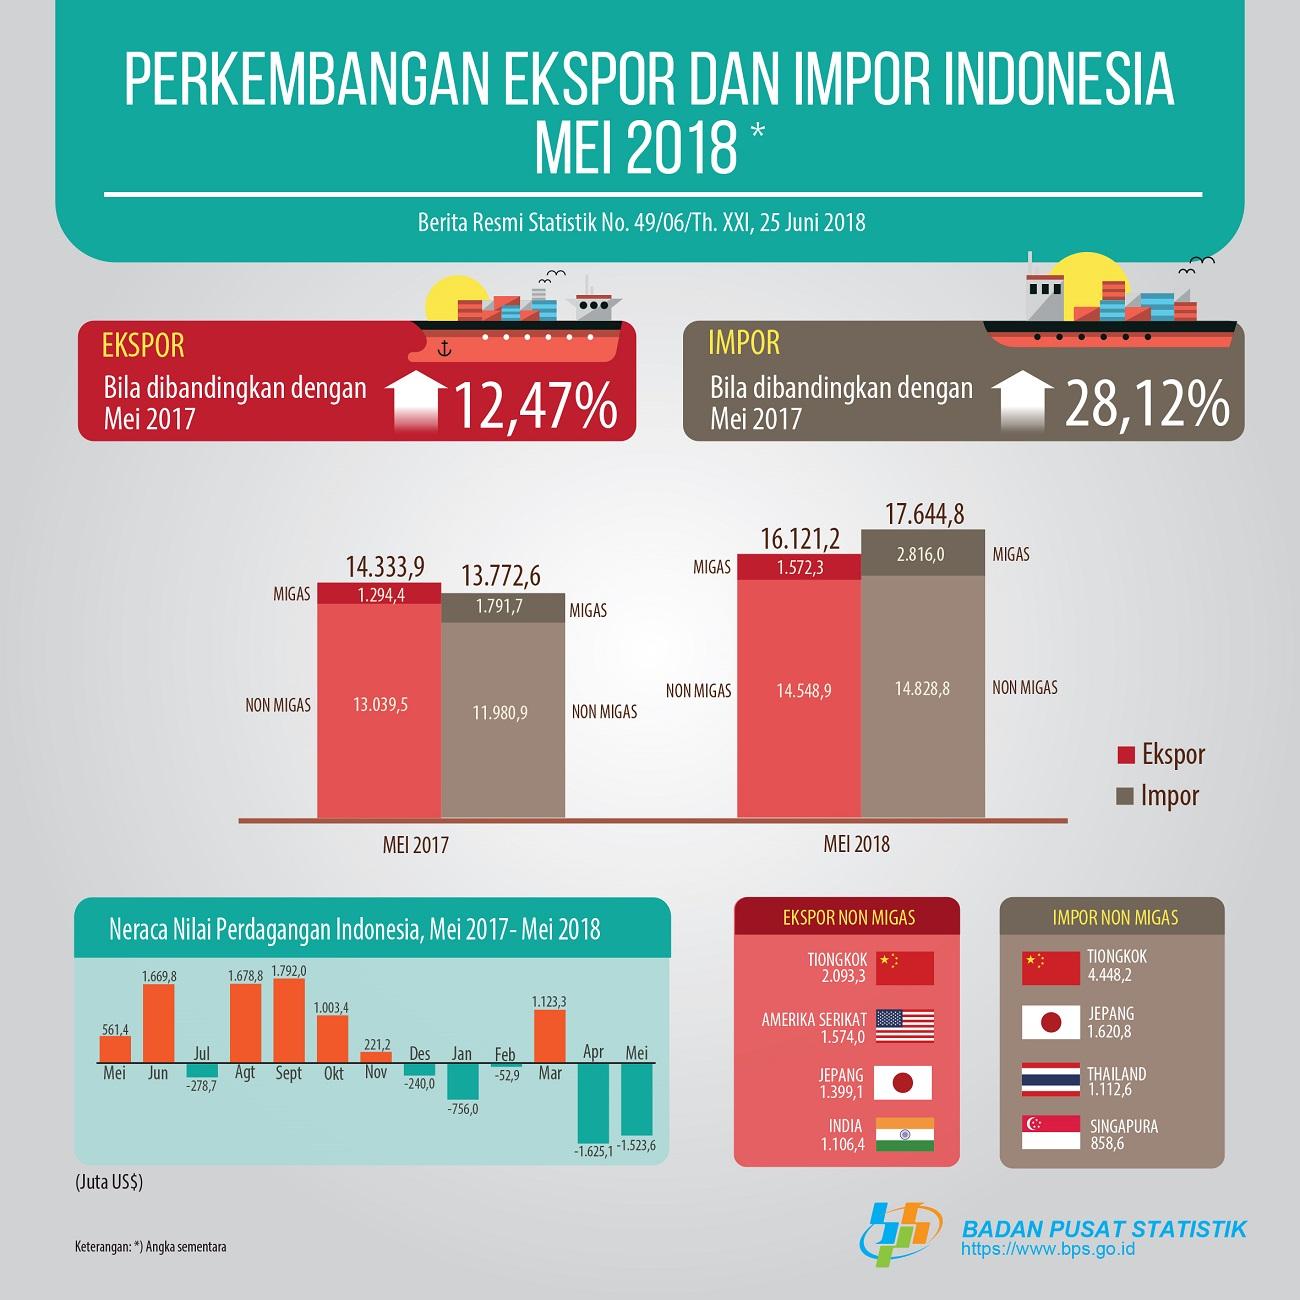 May 2018 Exports Reached US $ 16.12 Billion, while May 2010 Imports amounted to US $ 17.64 Billion, up 9.17 percent compared to April 2018.